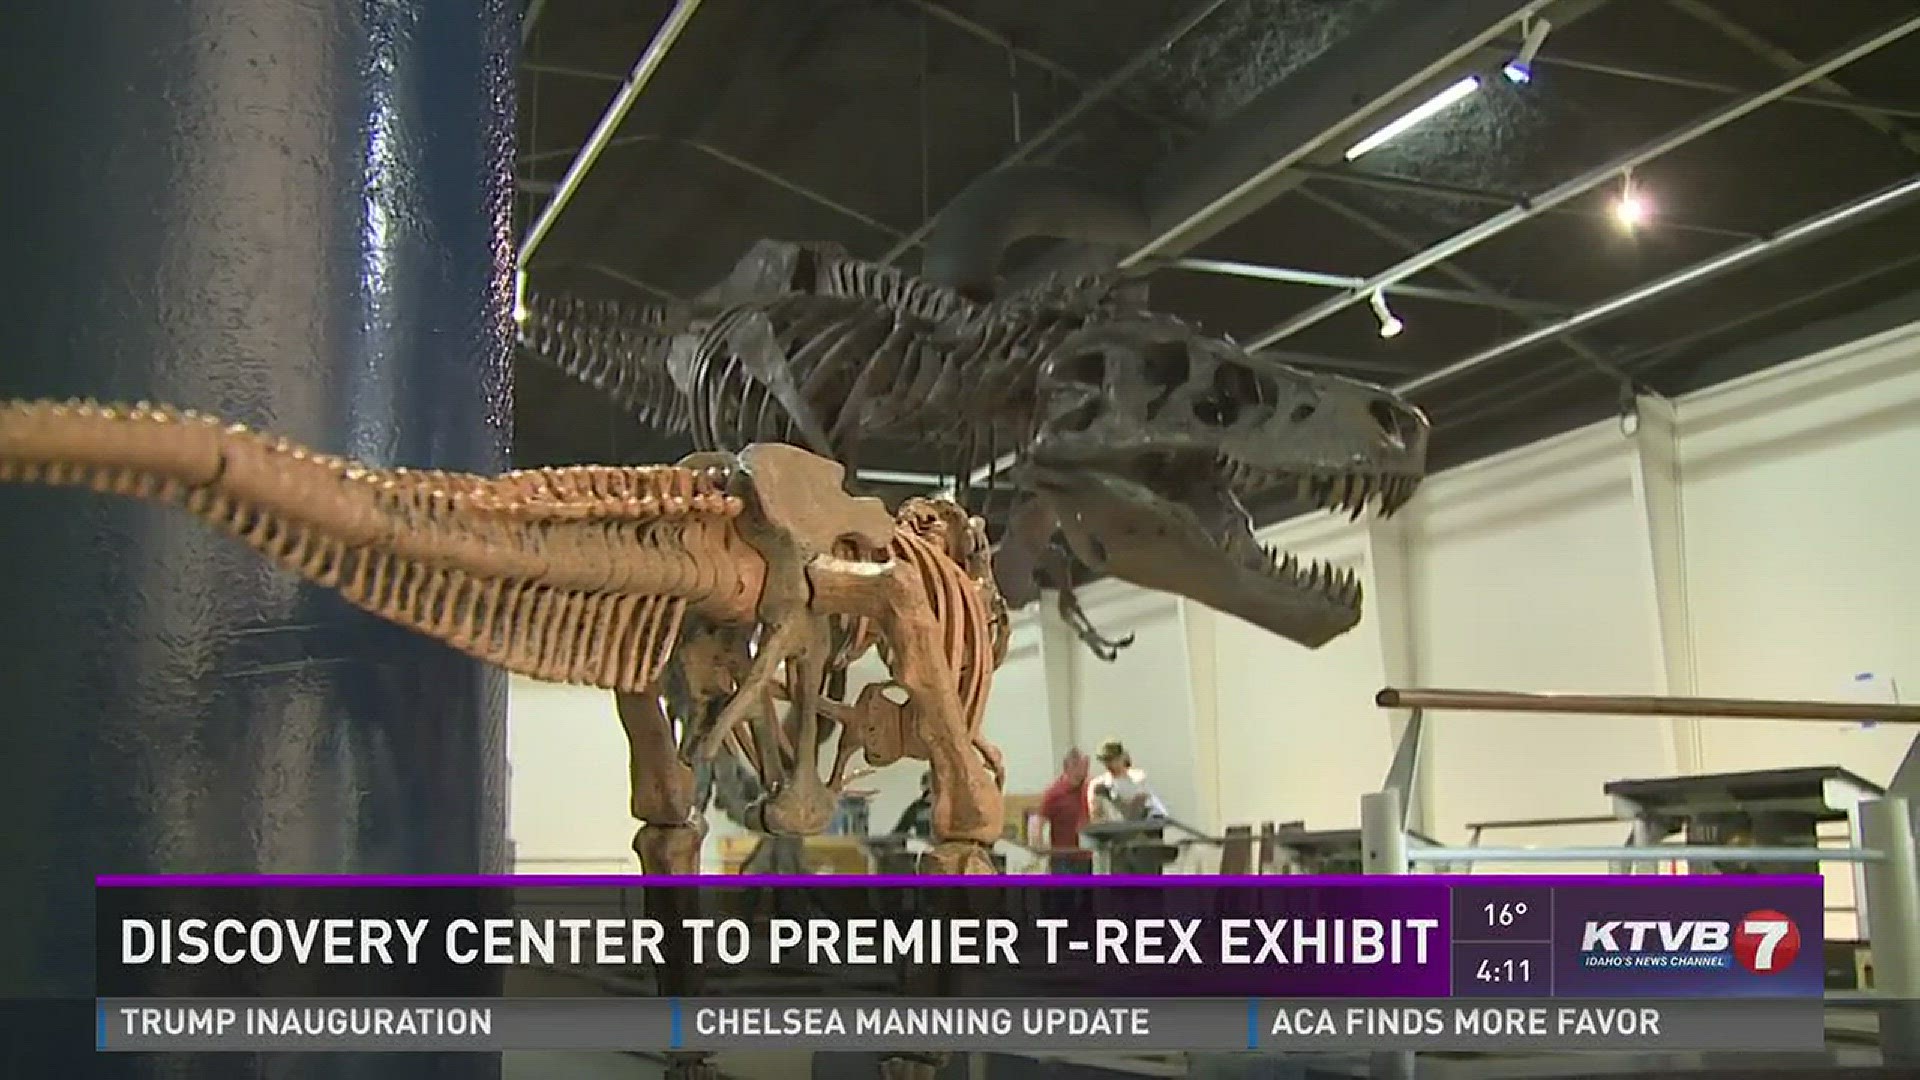 Employees are expecting the new exhibit to draw huge crowds.